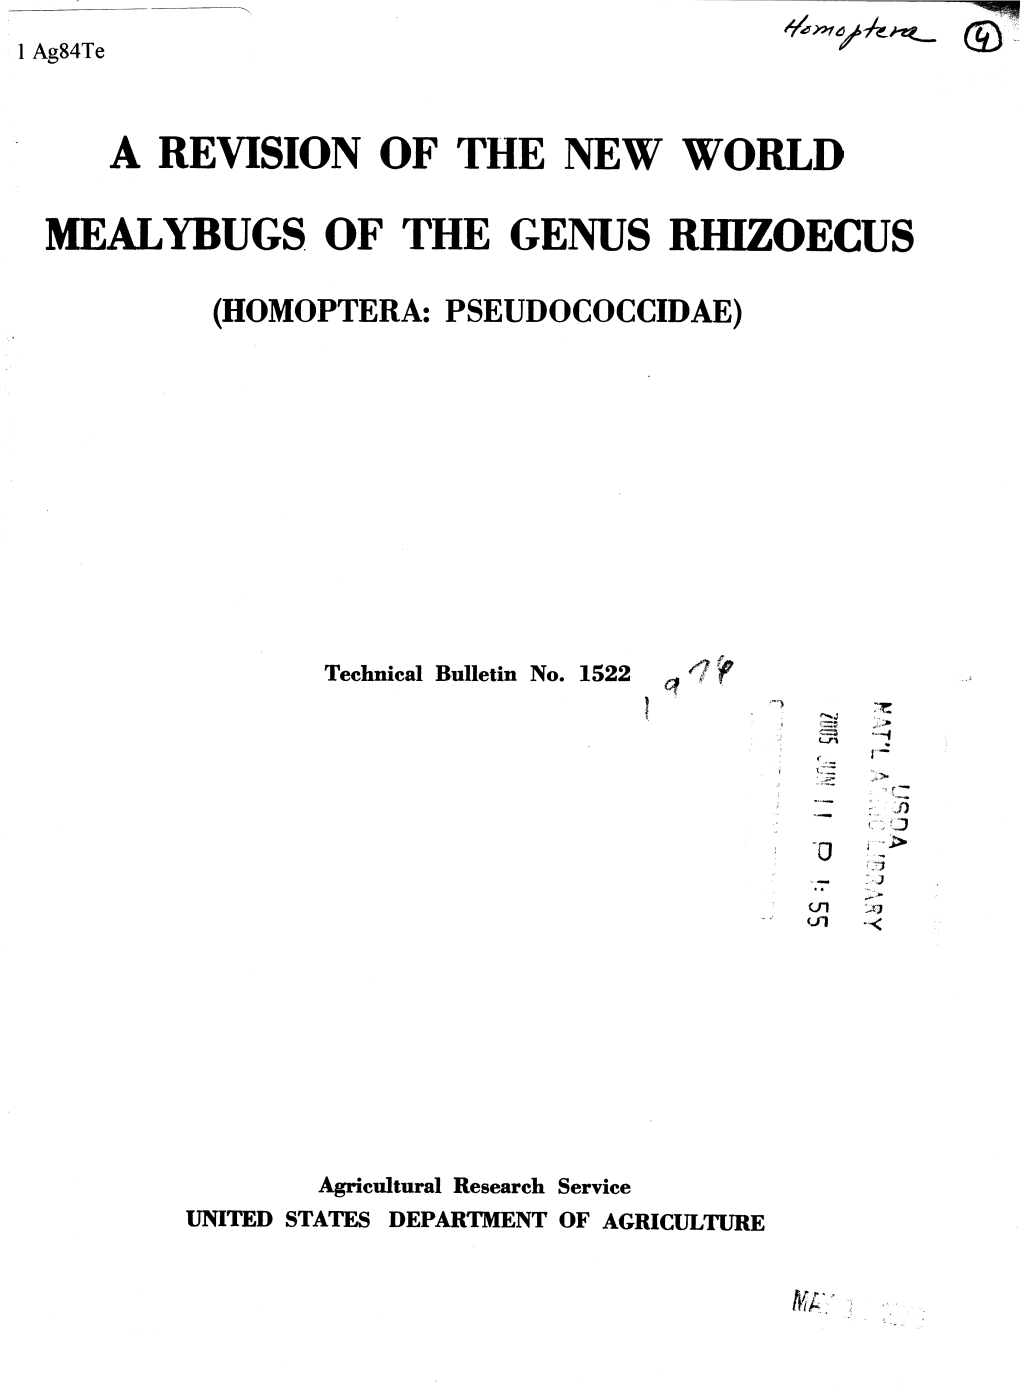 A Revision of the New World Mealybugs of the Genus Rhizoecus